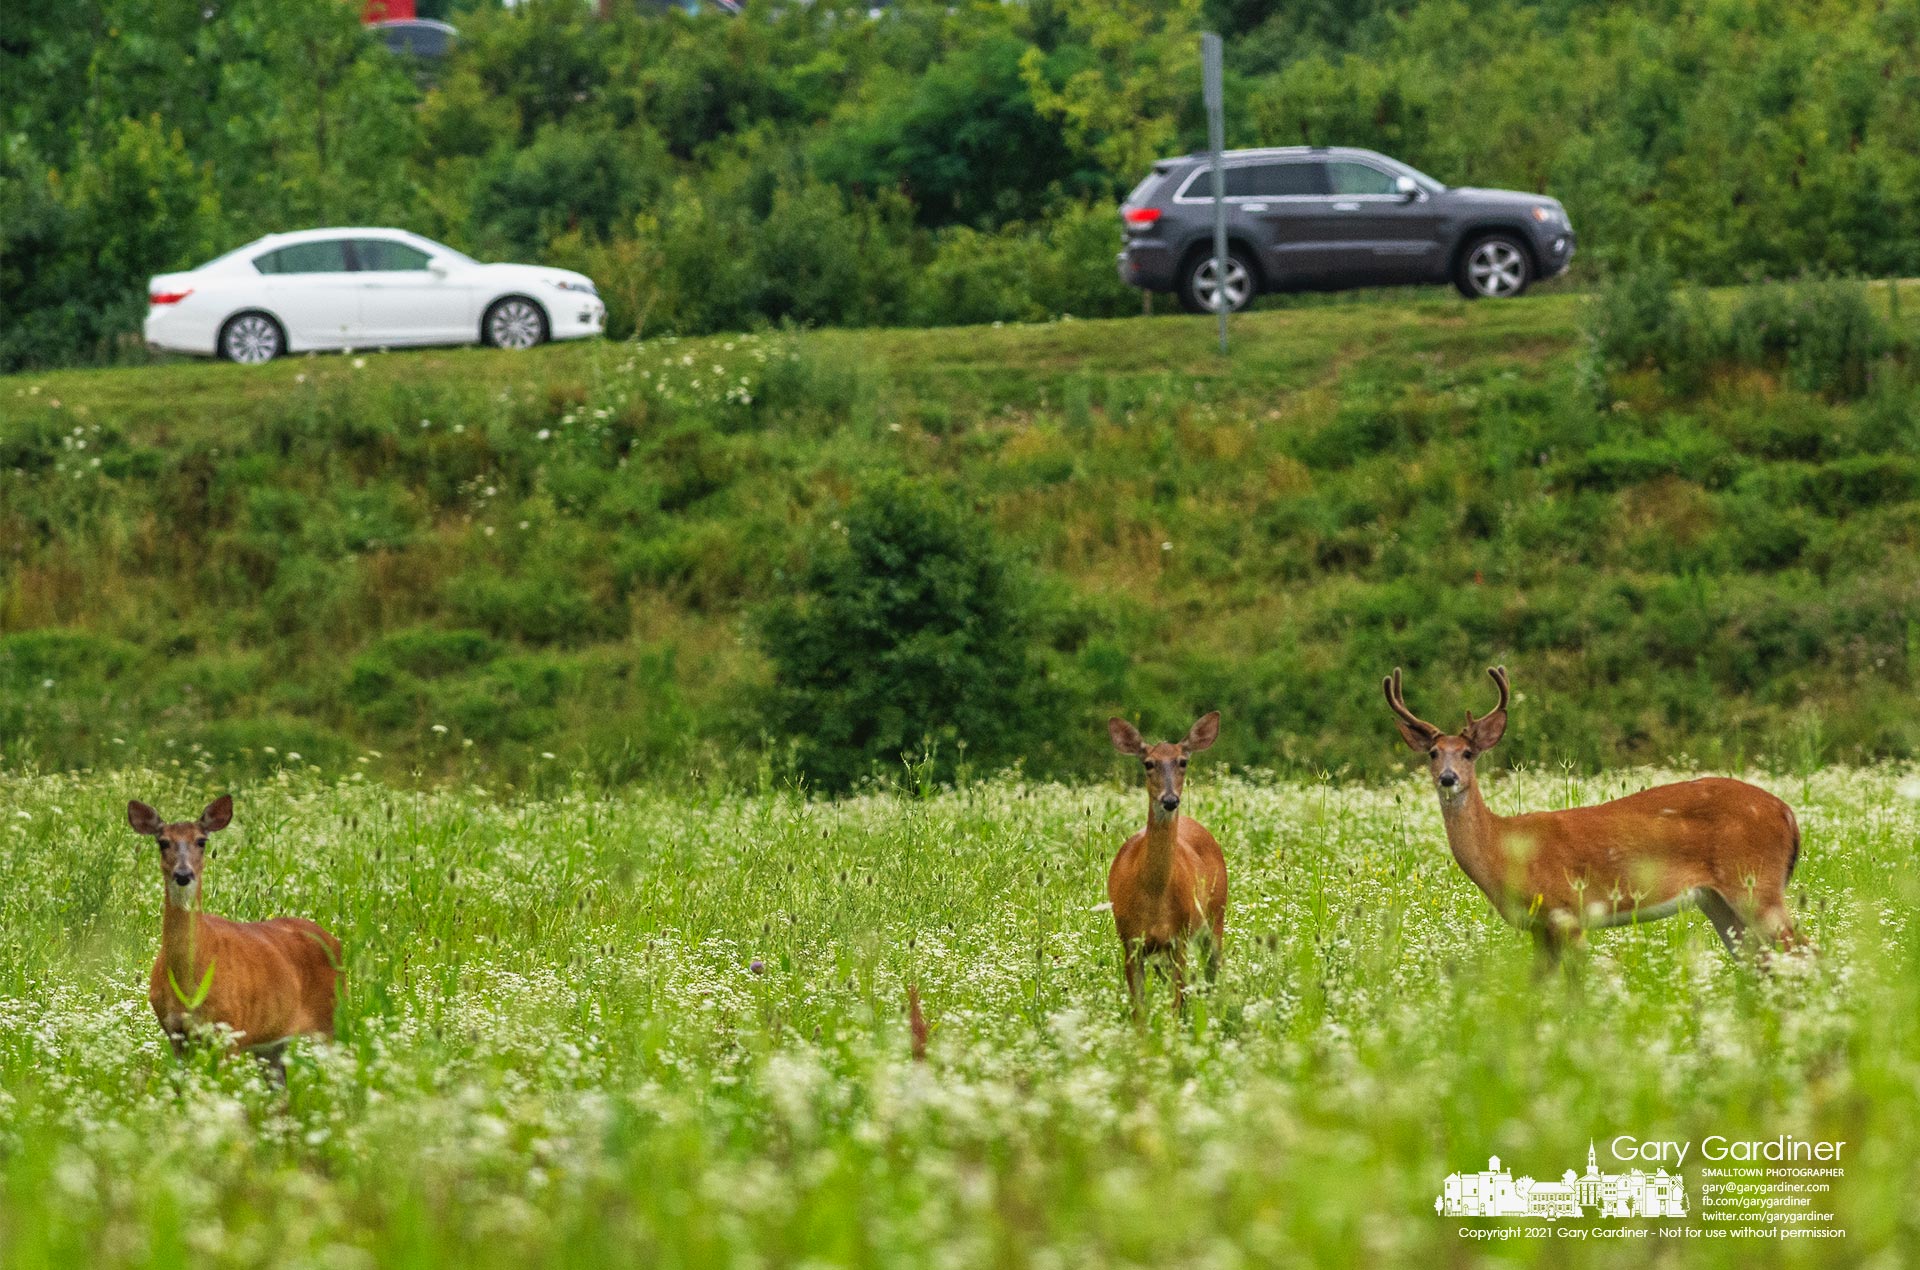 Three deer study their surroundings before resuming an afternoon meal in the open field below Ikea Way and Orion Place being ever careful for possible predators and human interruption. My Final Photo for July 9, 2021.